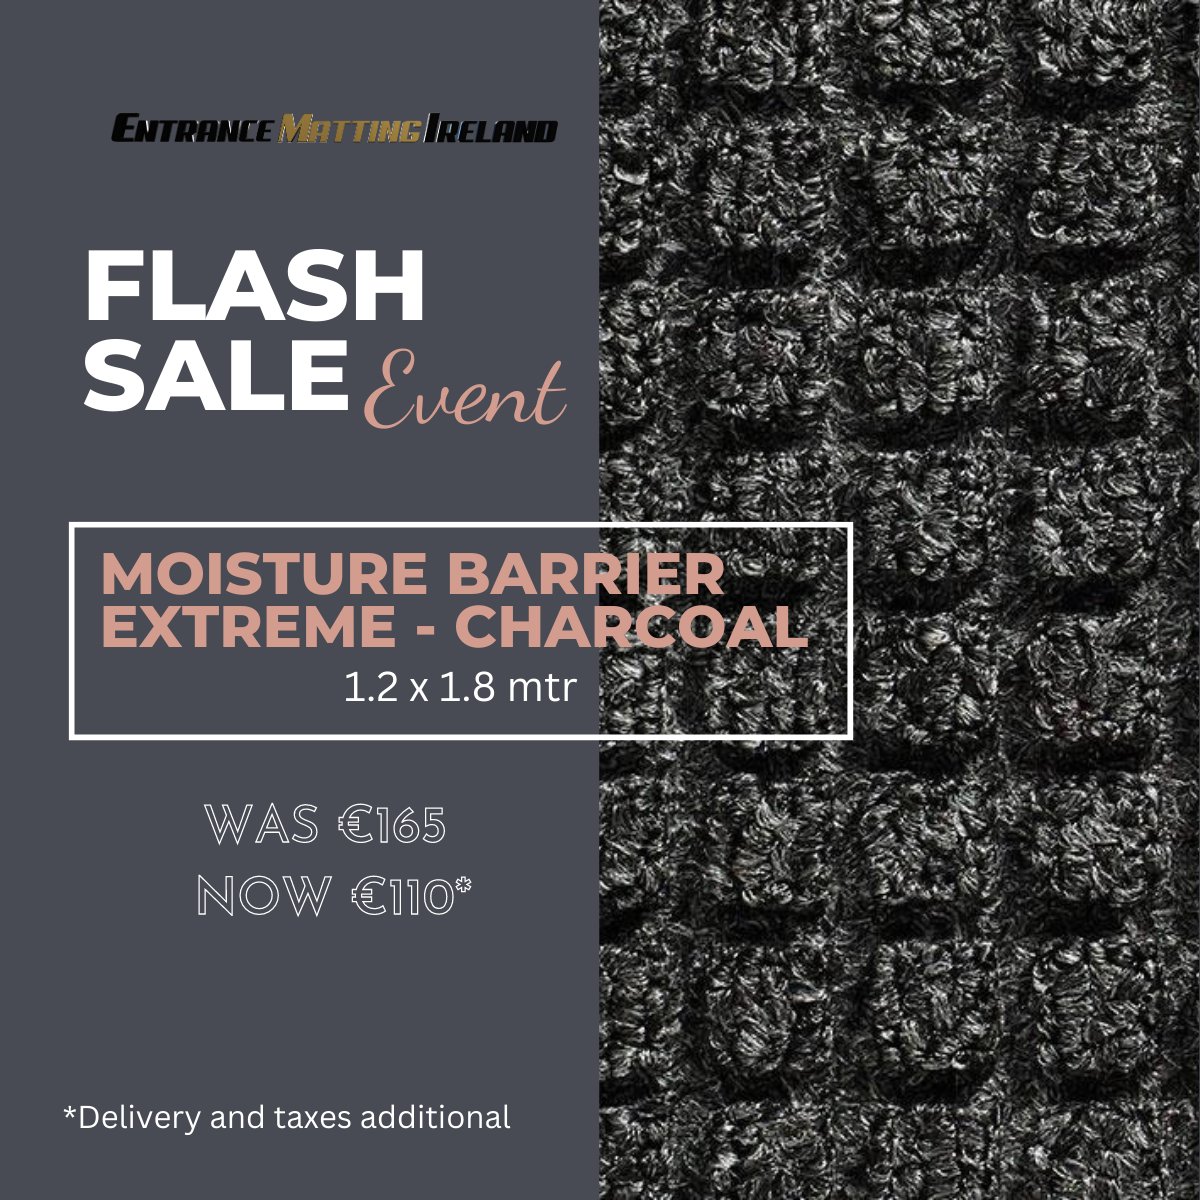 Looking for a way to keep your facility moisture-free? Check out our flash sale on moisture barrier extreme range mats(in charcoal color)! 
A premier product that draws, retains, and holds moisture.

#entrancematsireland #logomatsireland #matsireland #makeanentrance #entrancemats